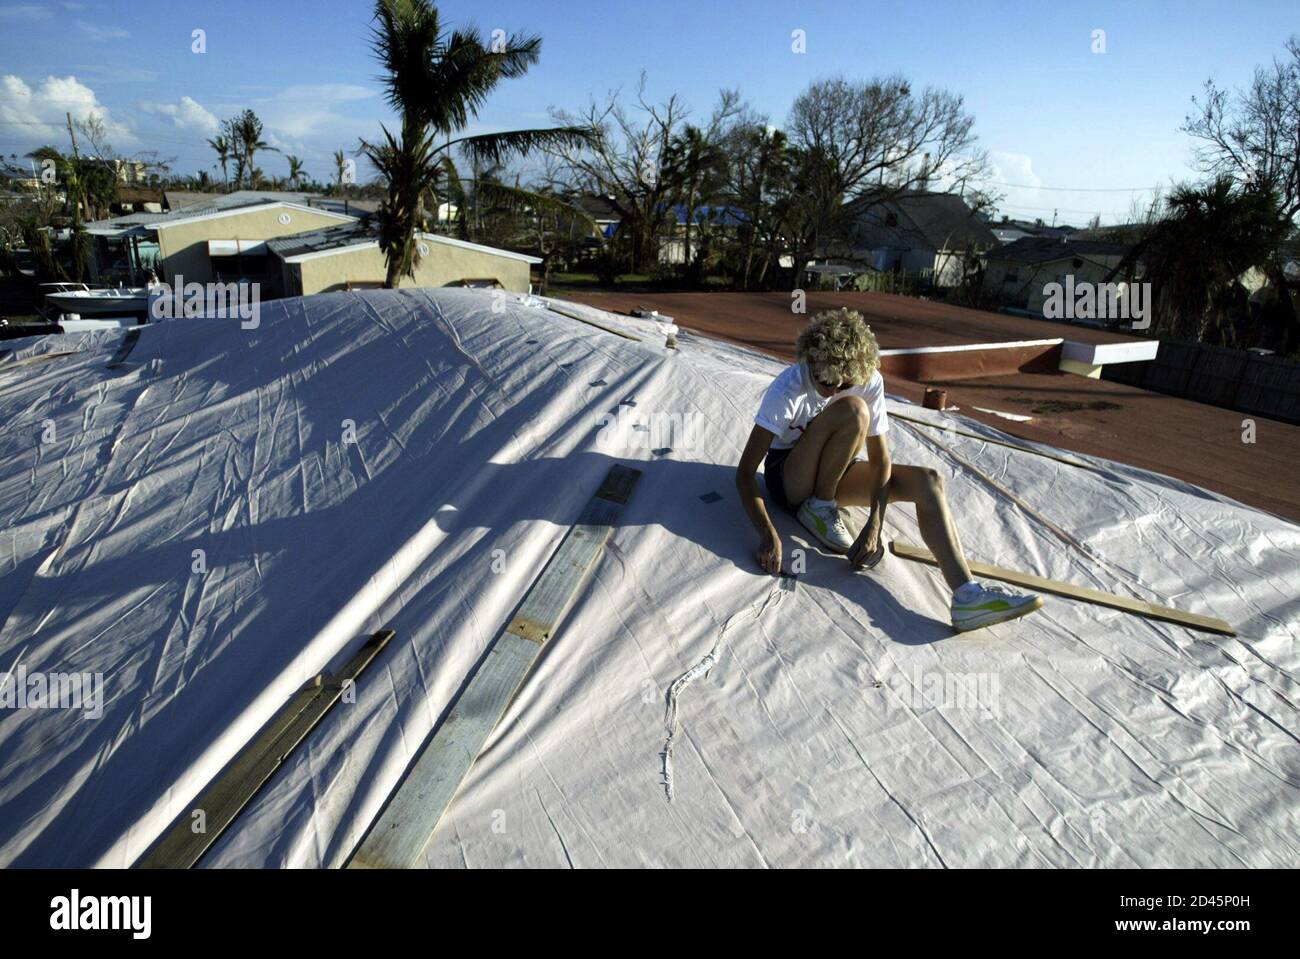 Lenora Quimby of Vero Beach, Florida uses duct tape to make repairs to the  roof of a friend's house in Fort Pierce, Florida September 27, 2004. The  roof had more tarps applied